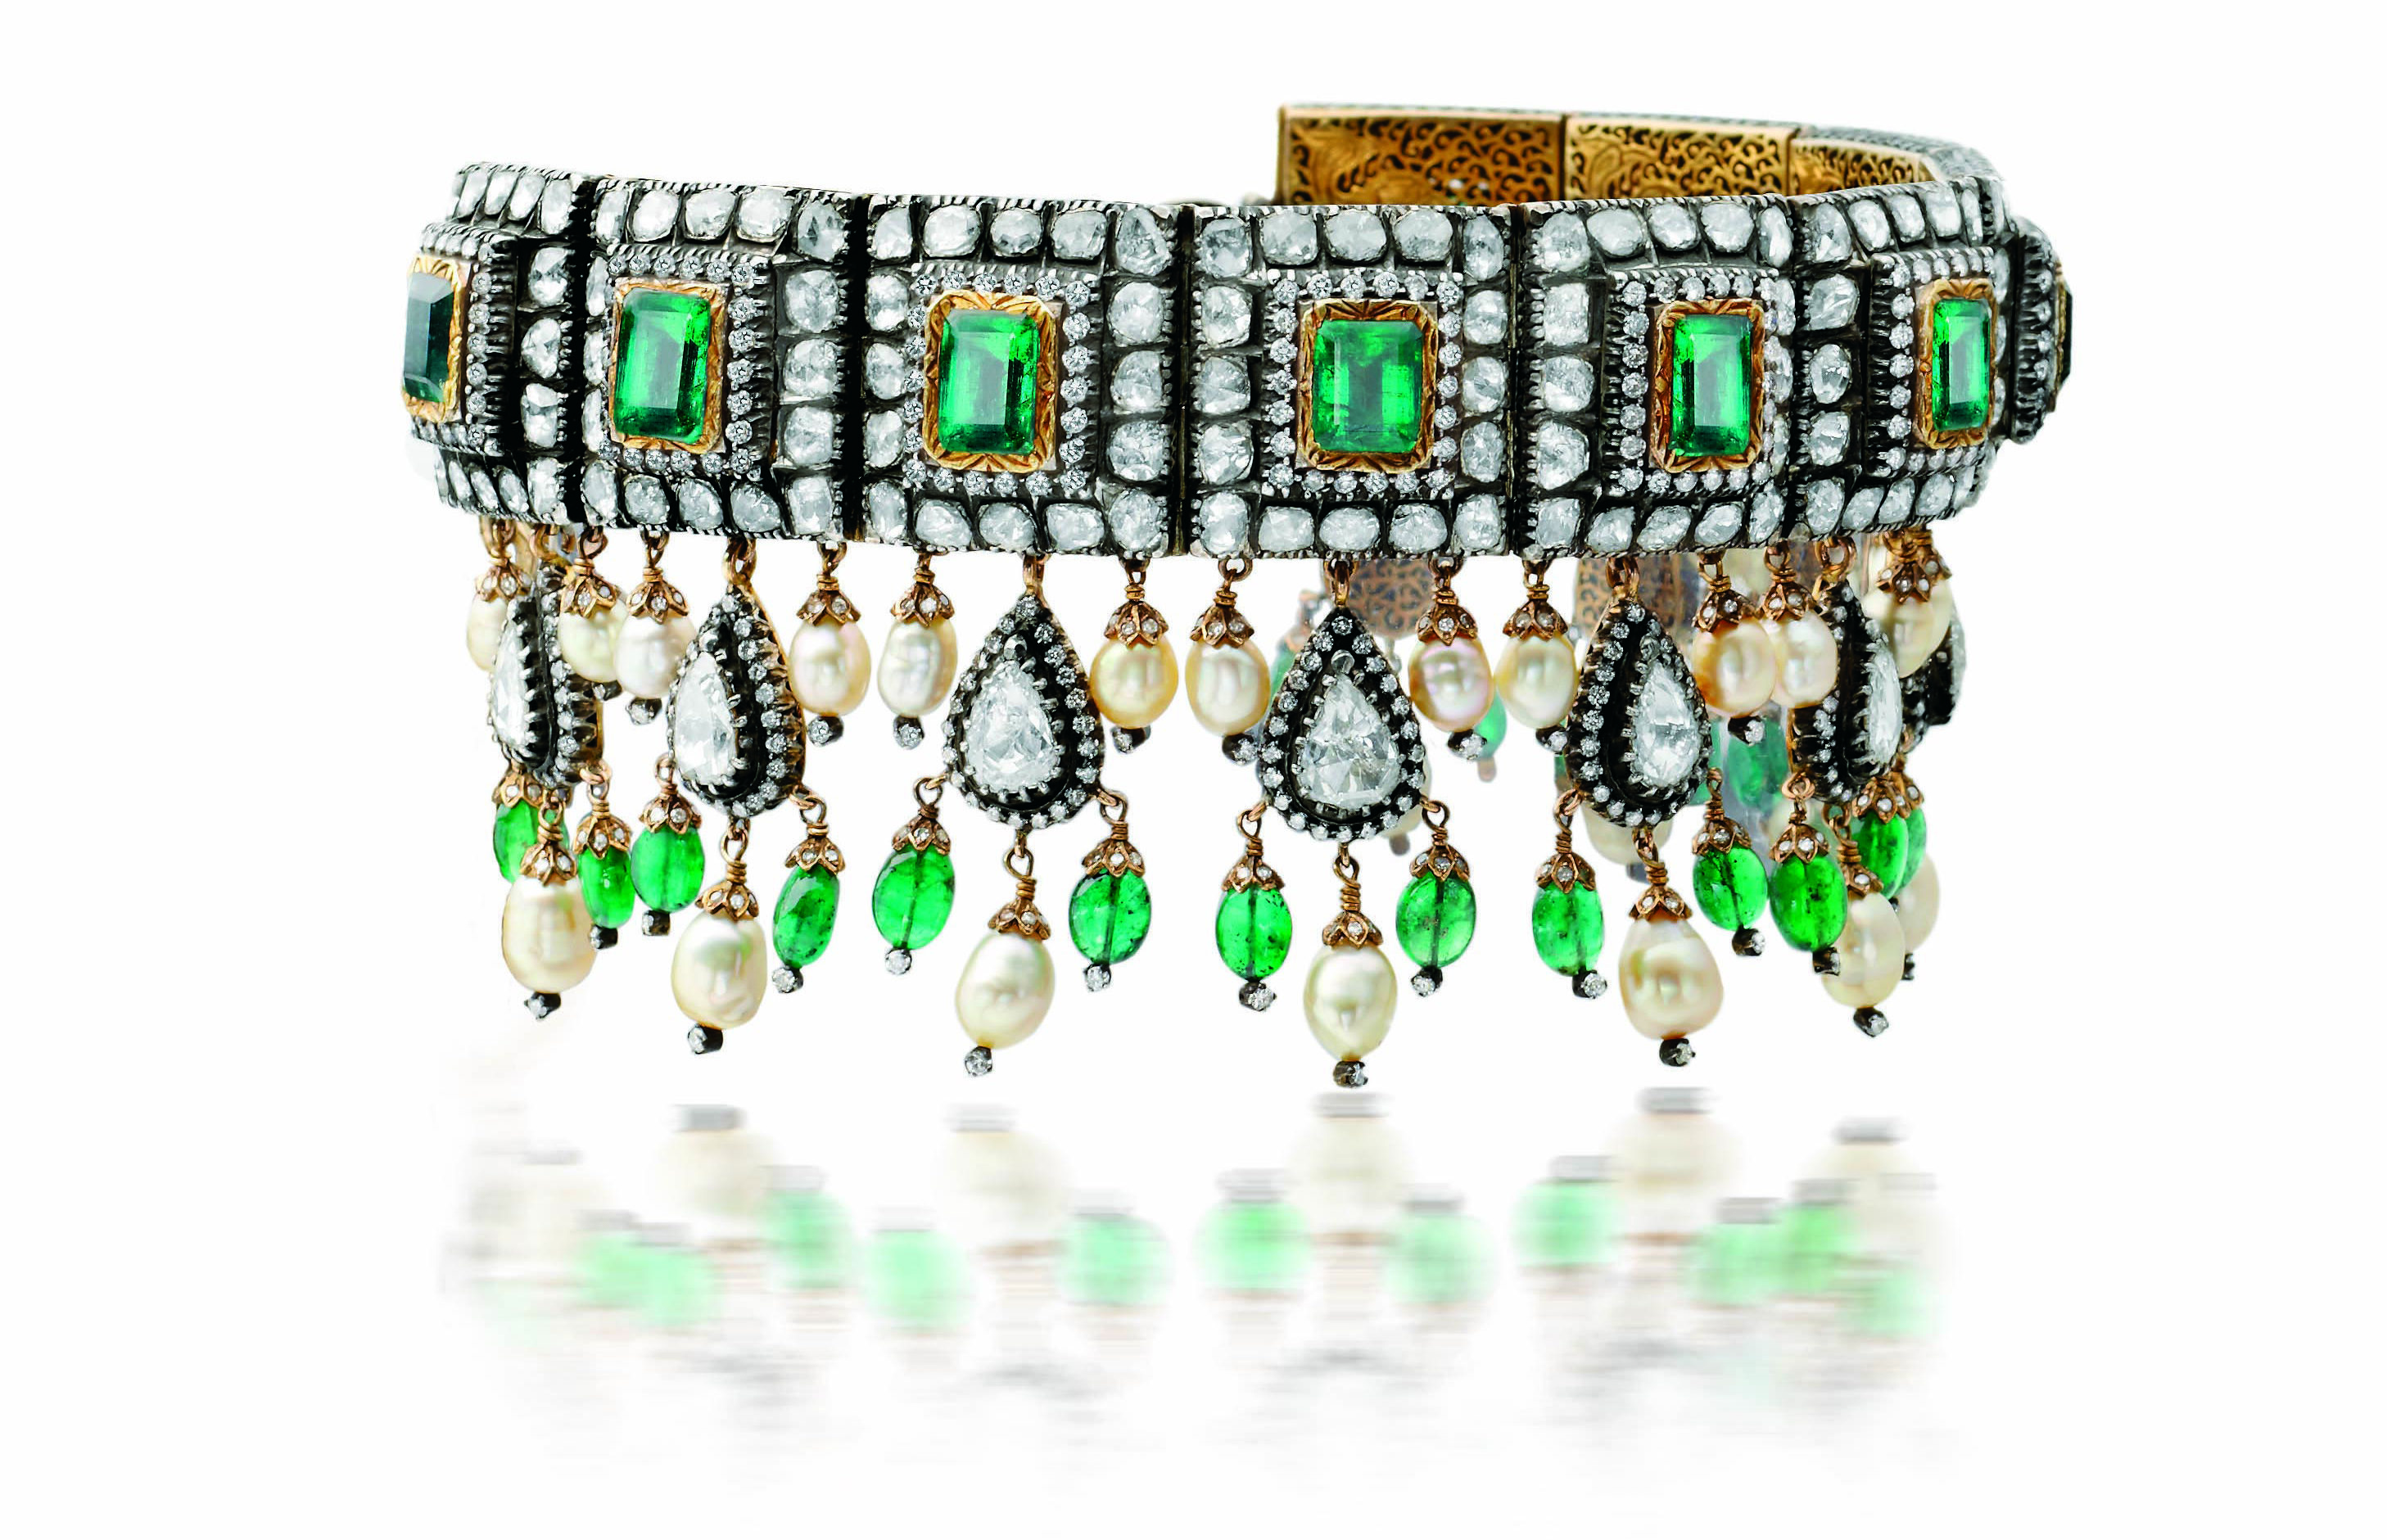 The Multi-Craftsmanship Involved in Traditional Indian Jewelry-Making is Unparalleled in the World: Tarang Arora